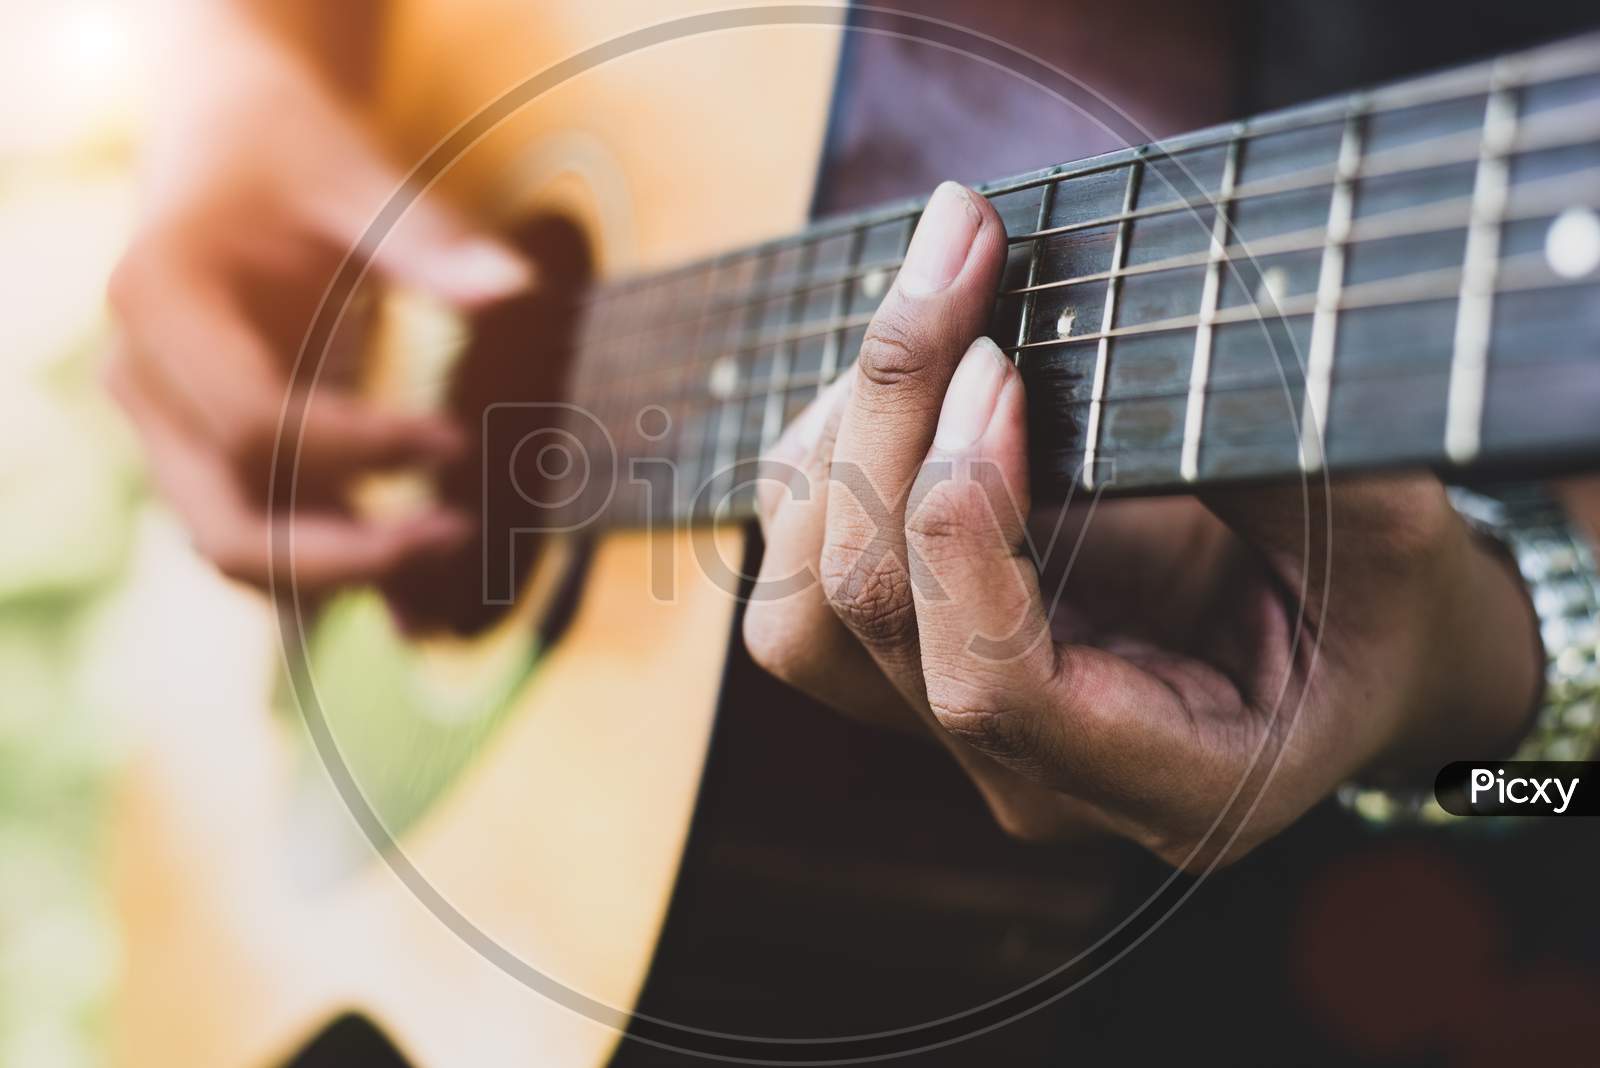 Close Up Of Guitarist Hand Playing Guitar. Musical And Instrument Concept. Outdoors And Leisure Theme. Selective Focus On Left Hand.